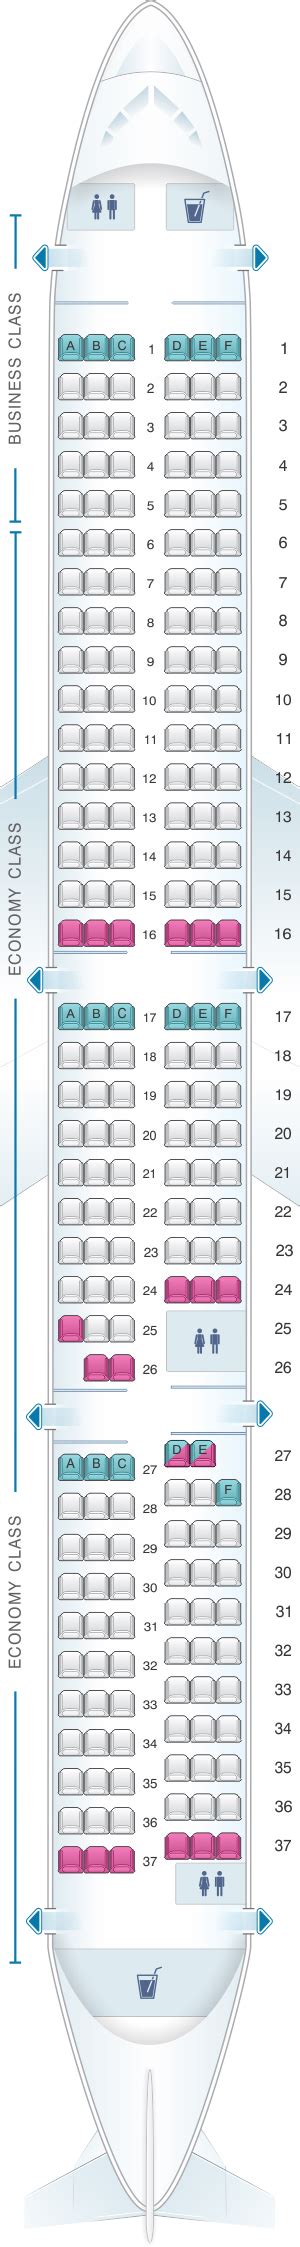 Airbus a321 neo seats. China Southern flies this Airbus A321 in a three class configuration with 12 recliner Business Class seats, 24 Premium Economy seats, and 143 Economy seats. Featured user comments Read user reviews for China Southern Airbus A321 (321) 